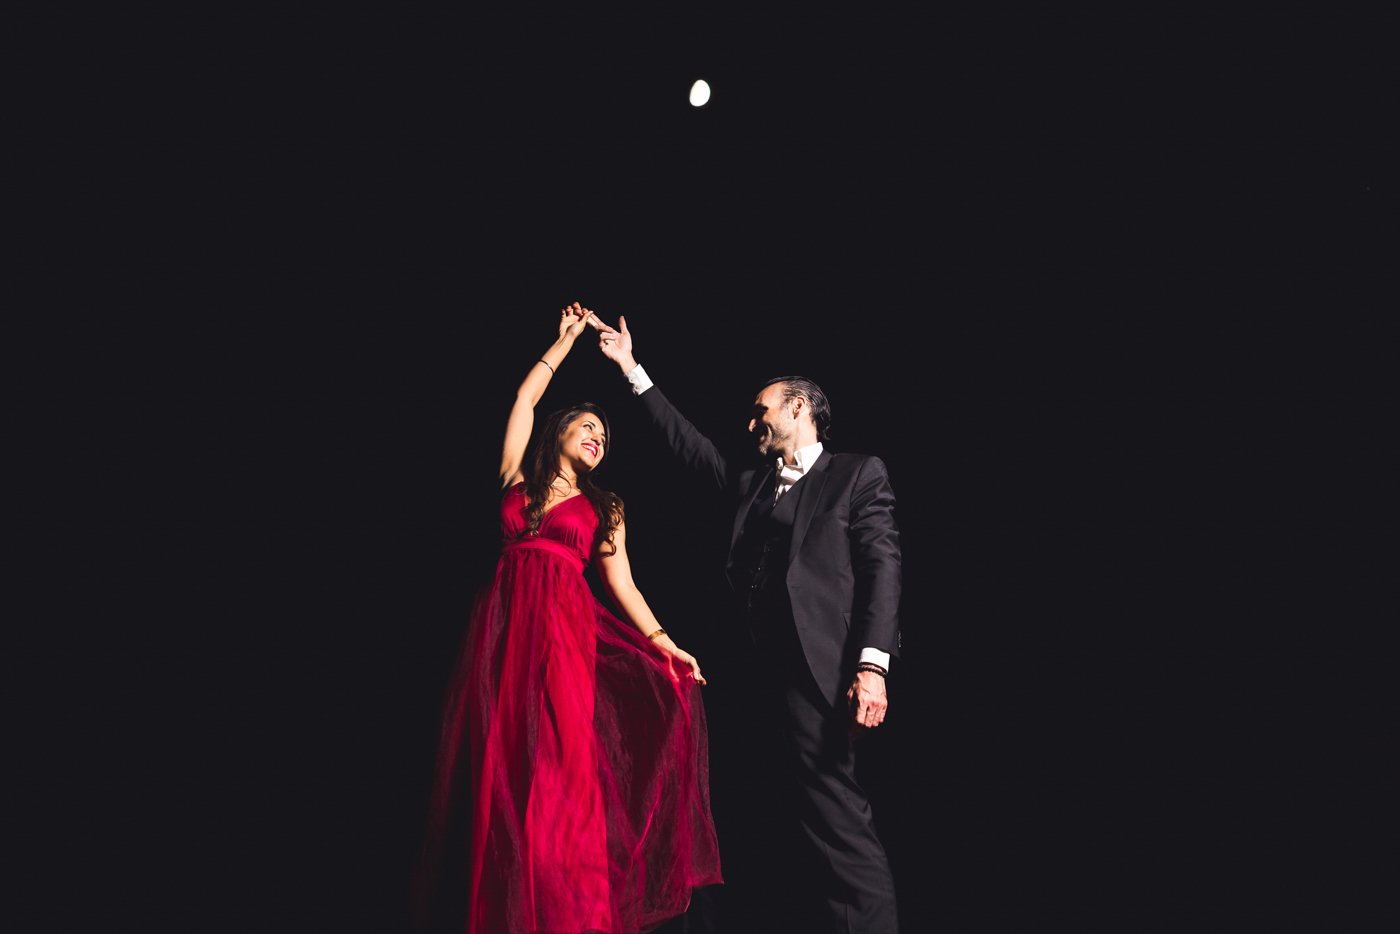 man twirls fiance under the moon at night during engagement session